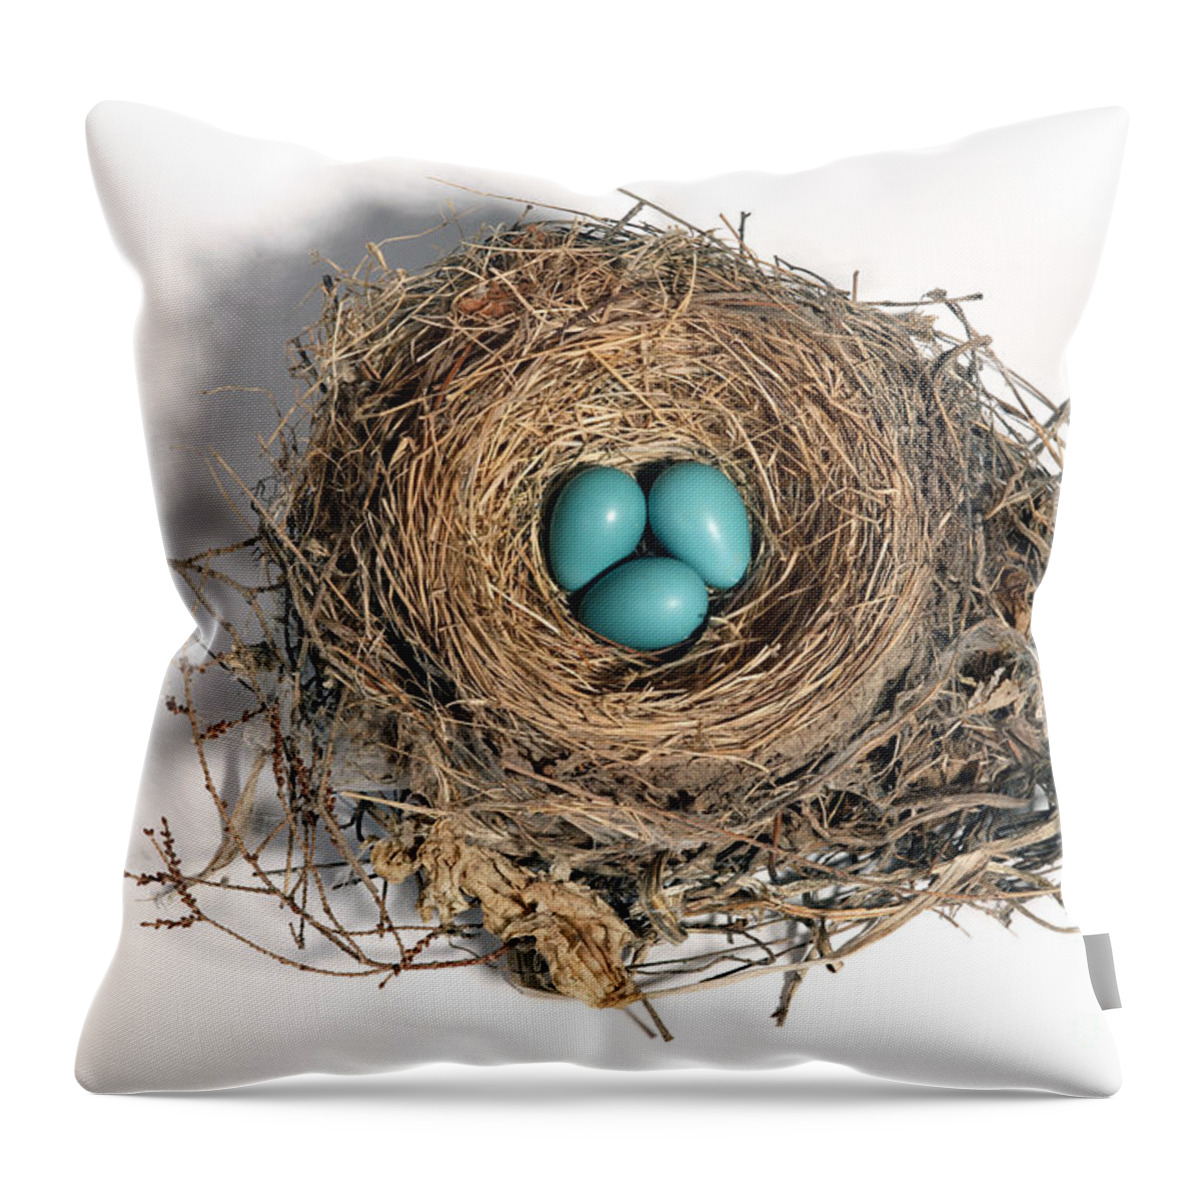 American Robin Throw Pillow featuring the photograph Robins Nest With Eggs #2 by Ted Kinsman